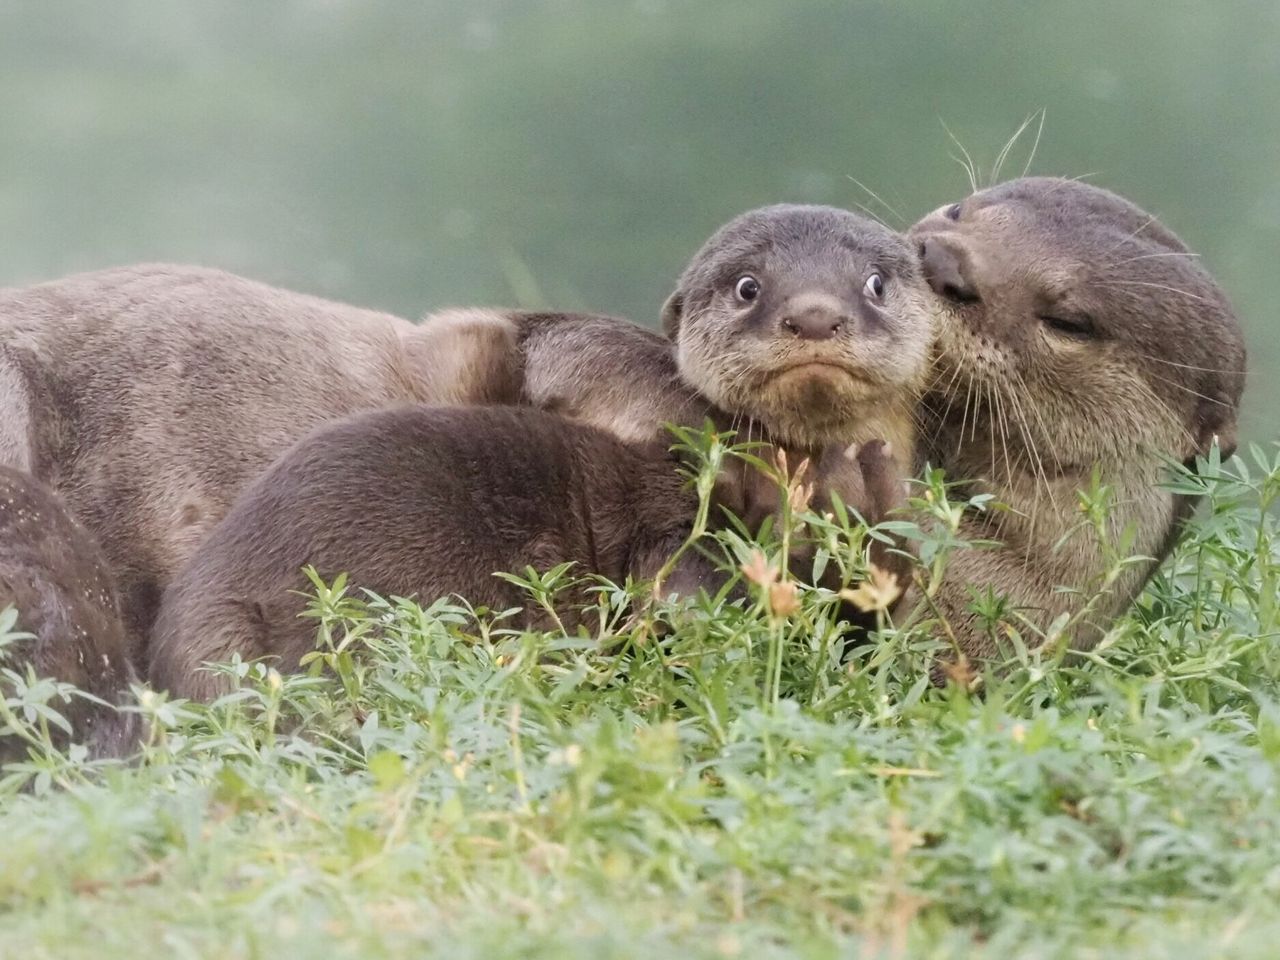 “It’s the Last Day of School Holidays” is an image of smooth-coated otters in Singapore.